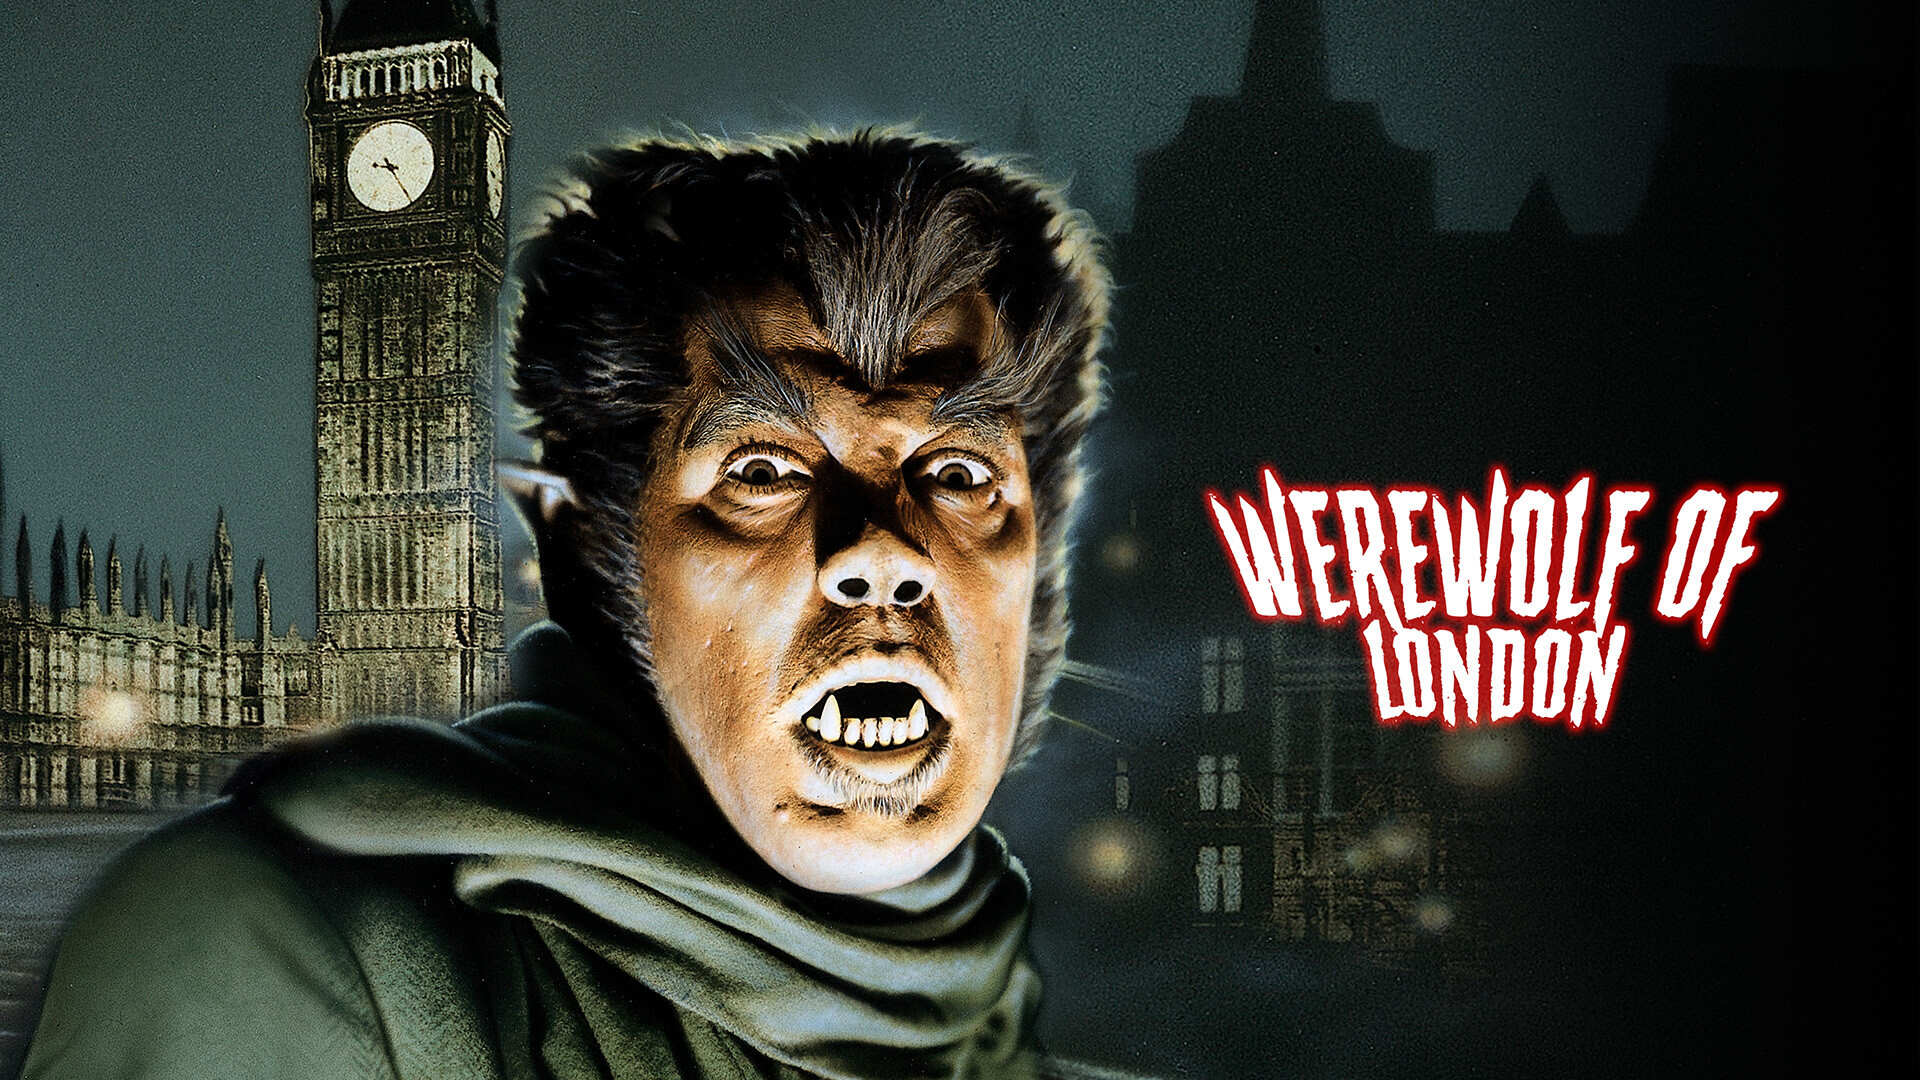 37-facts-about-the-movie-werewolf-of-london